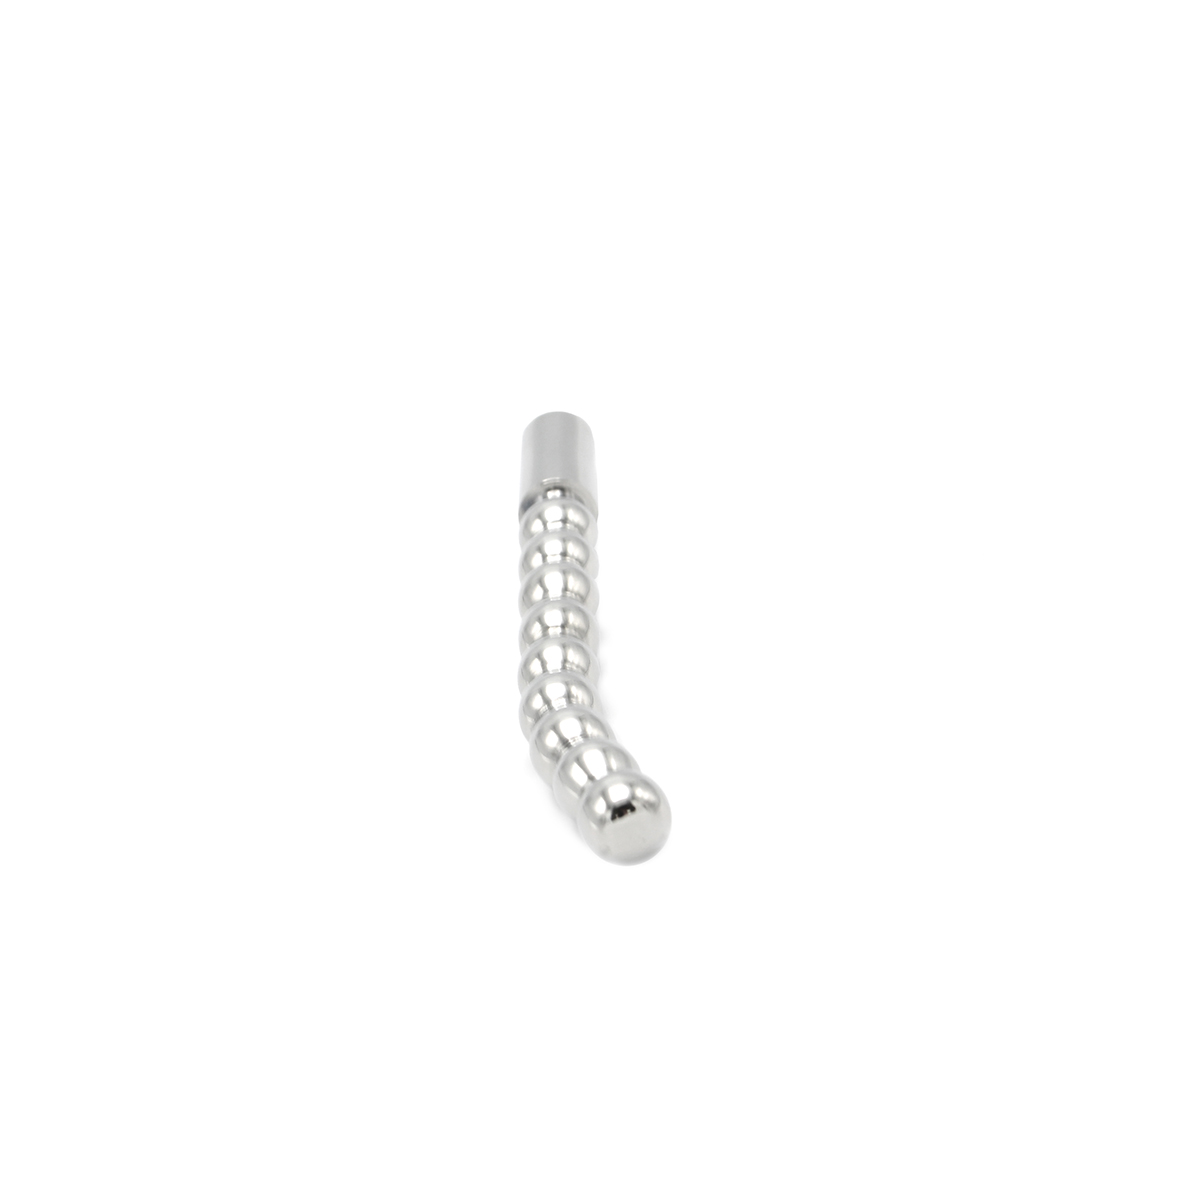 Solid-Penis-Plug-Beaded-Curved-8-mm-OPR-2960102-5